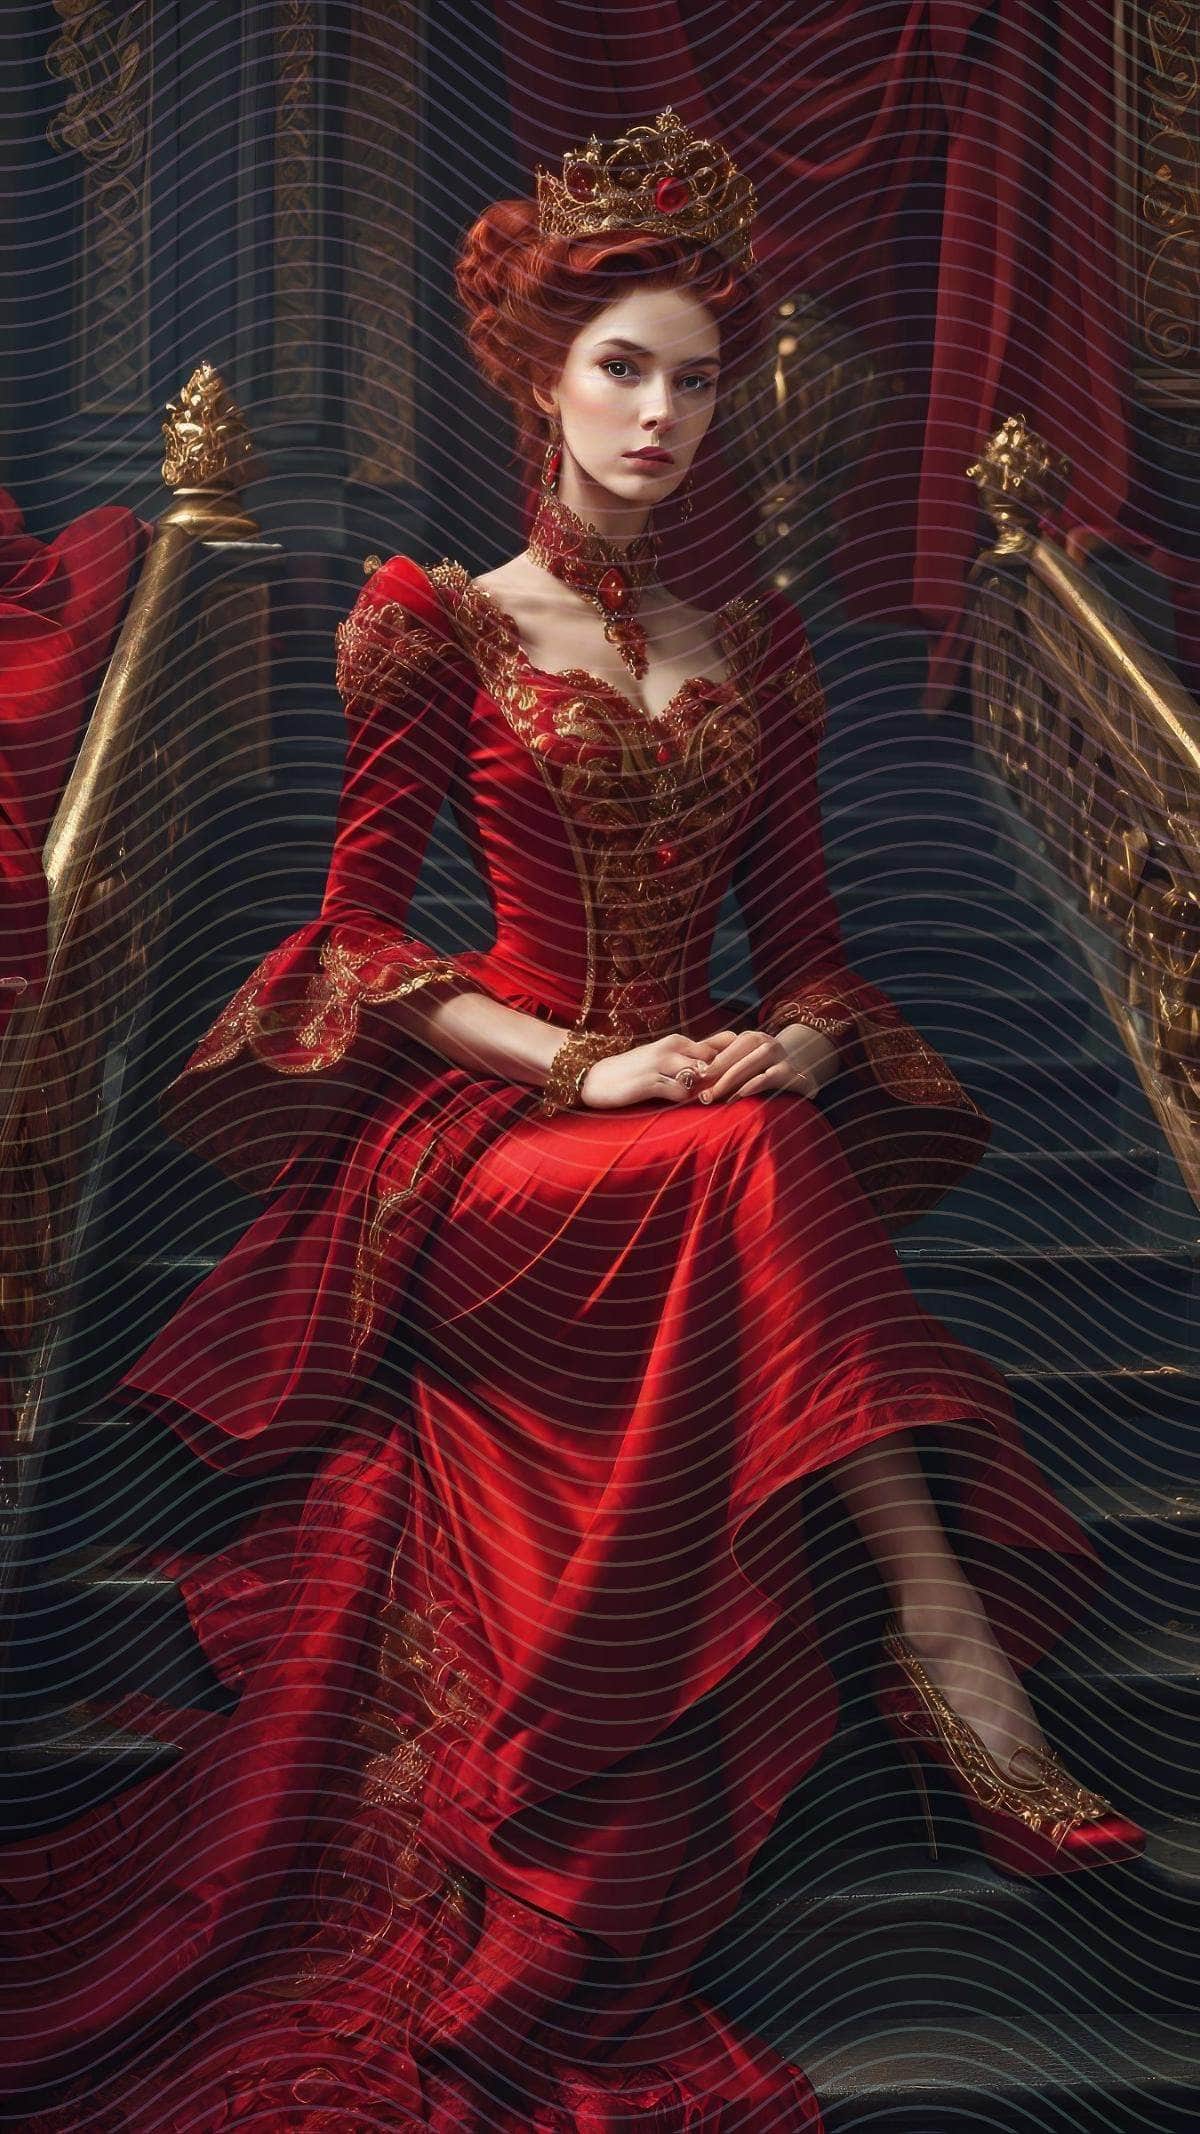 Royal Woman with Red Dress Sitting on A Set of Stairs